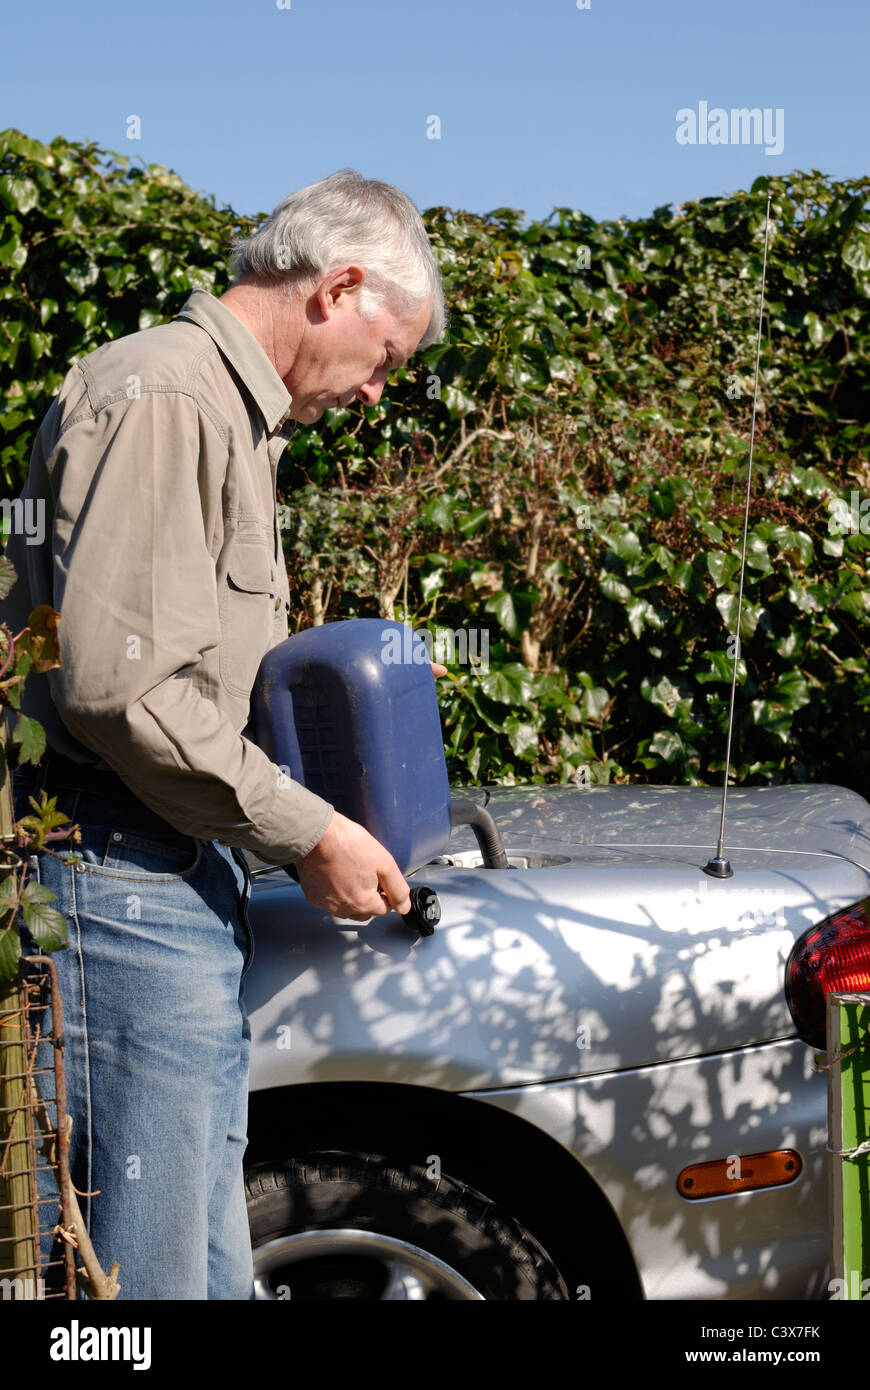 Mature man putting fuel into vehicle from a carry can in a rural environment Stock Photo